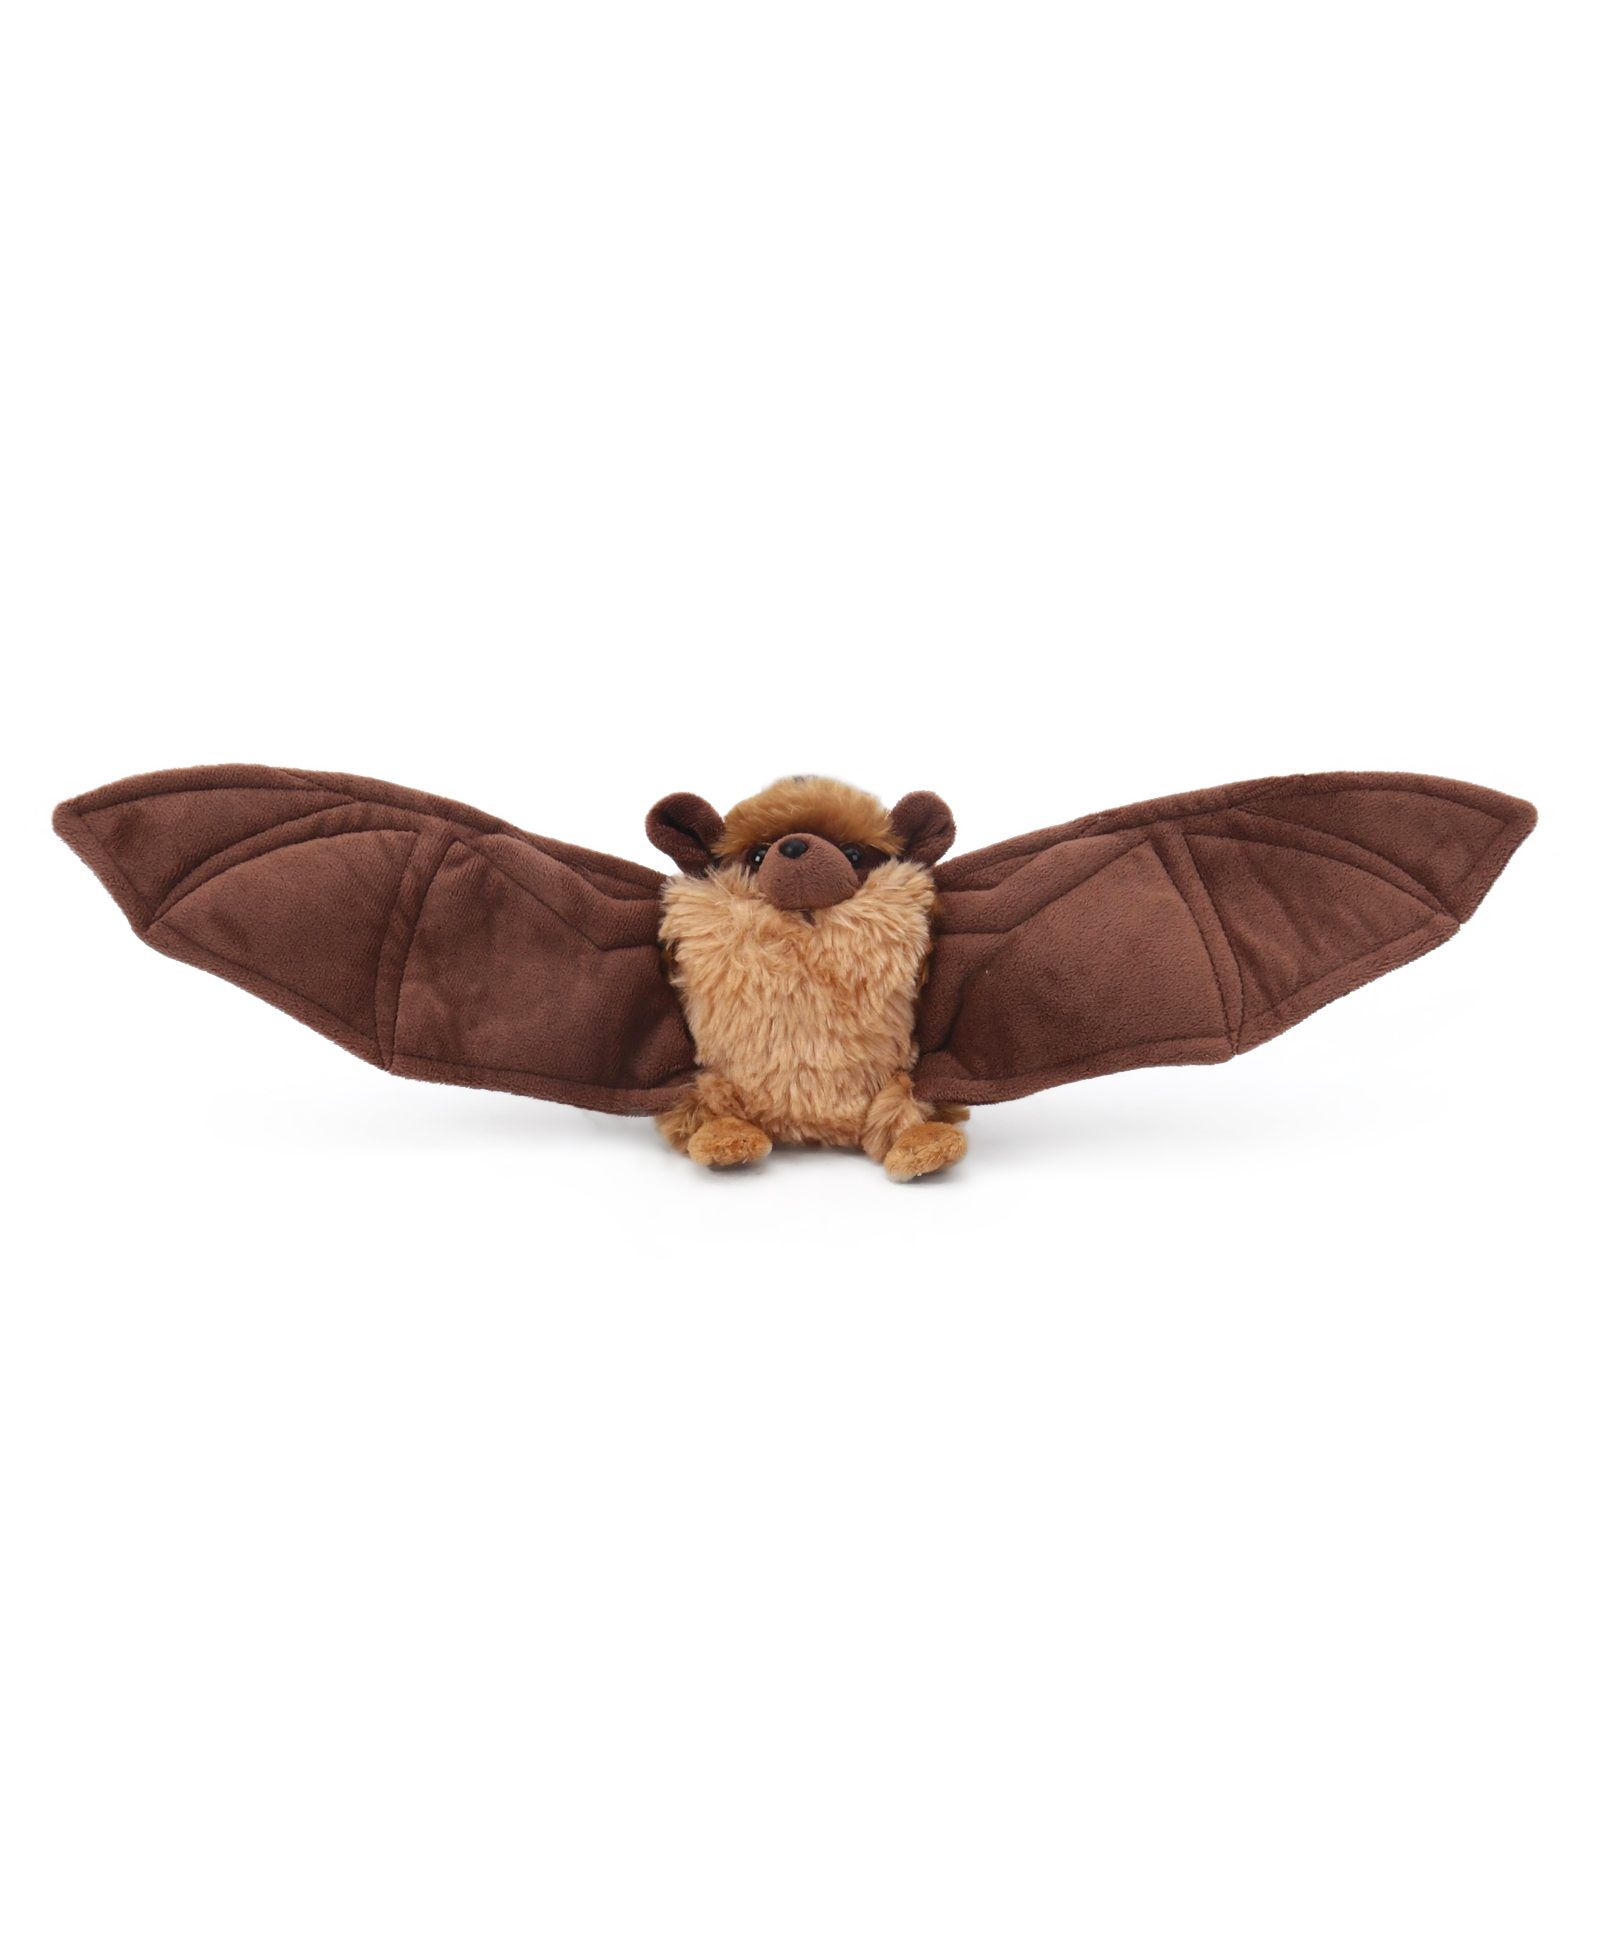 Living Nature Realistic Small Bat Stuffed Plush Animal Toy 24cm **FREE DELIVERY*